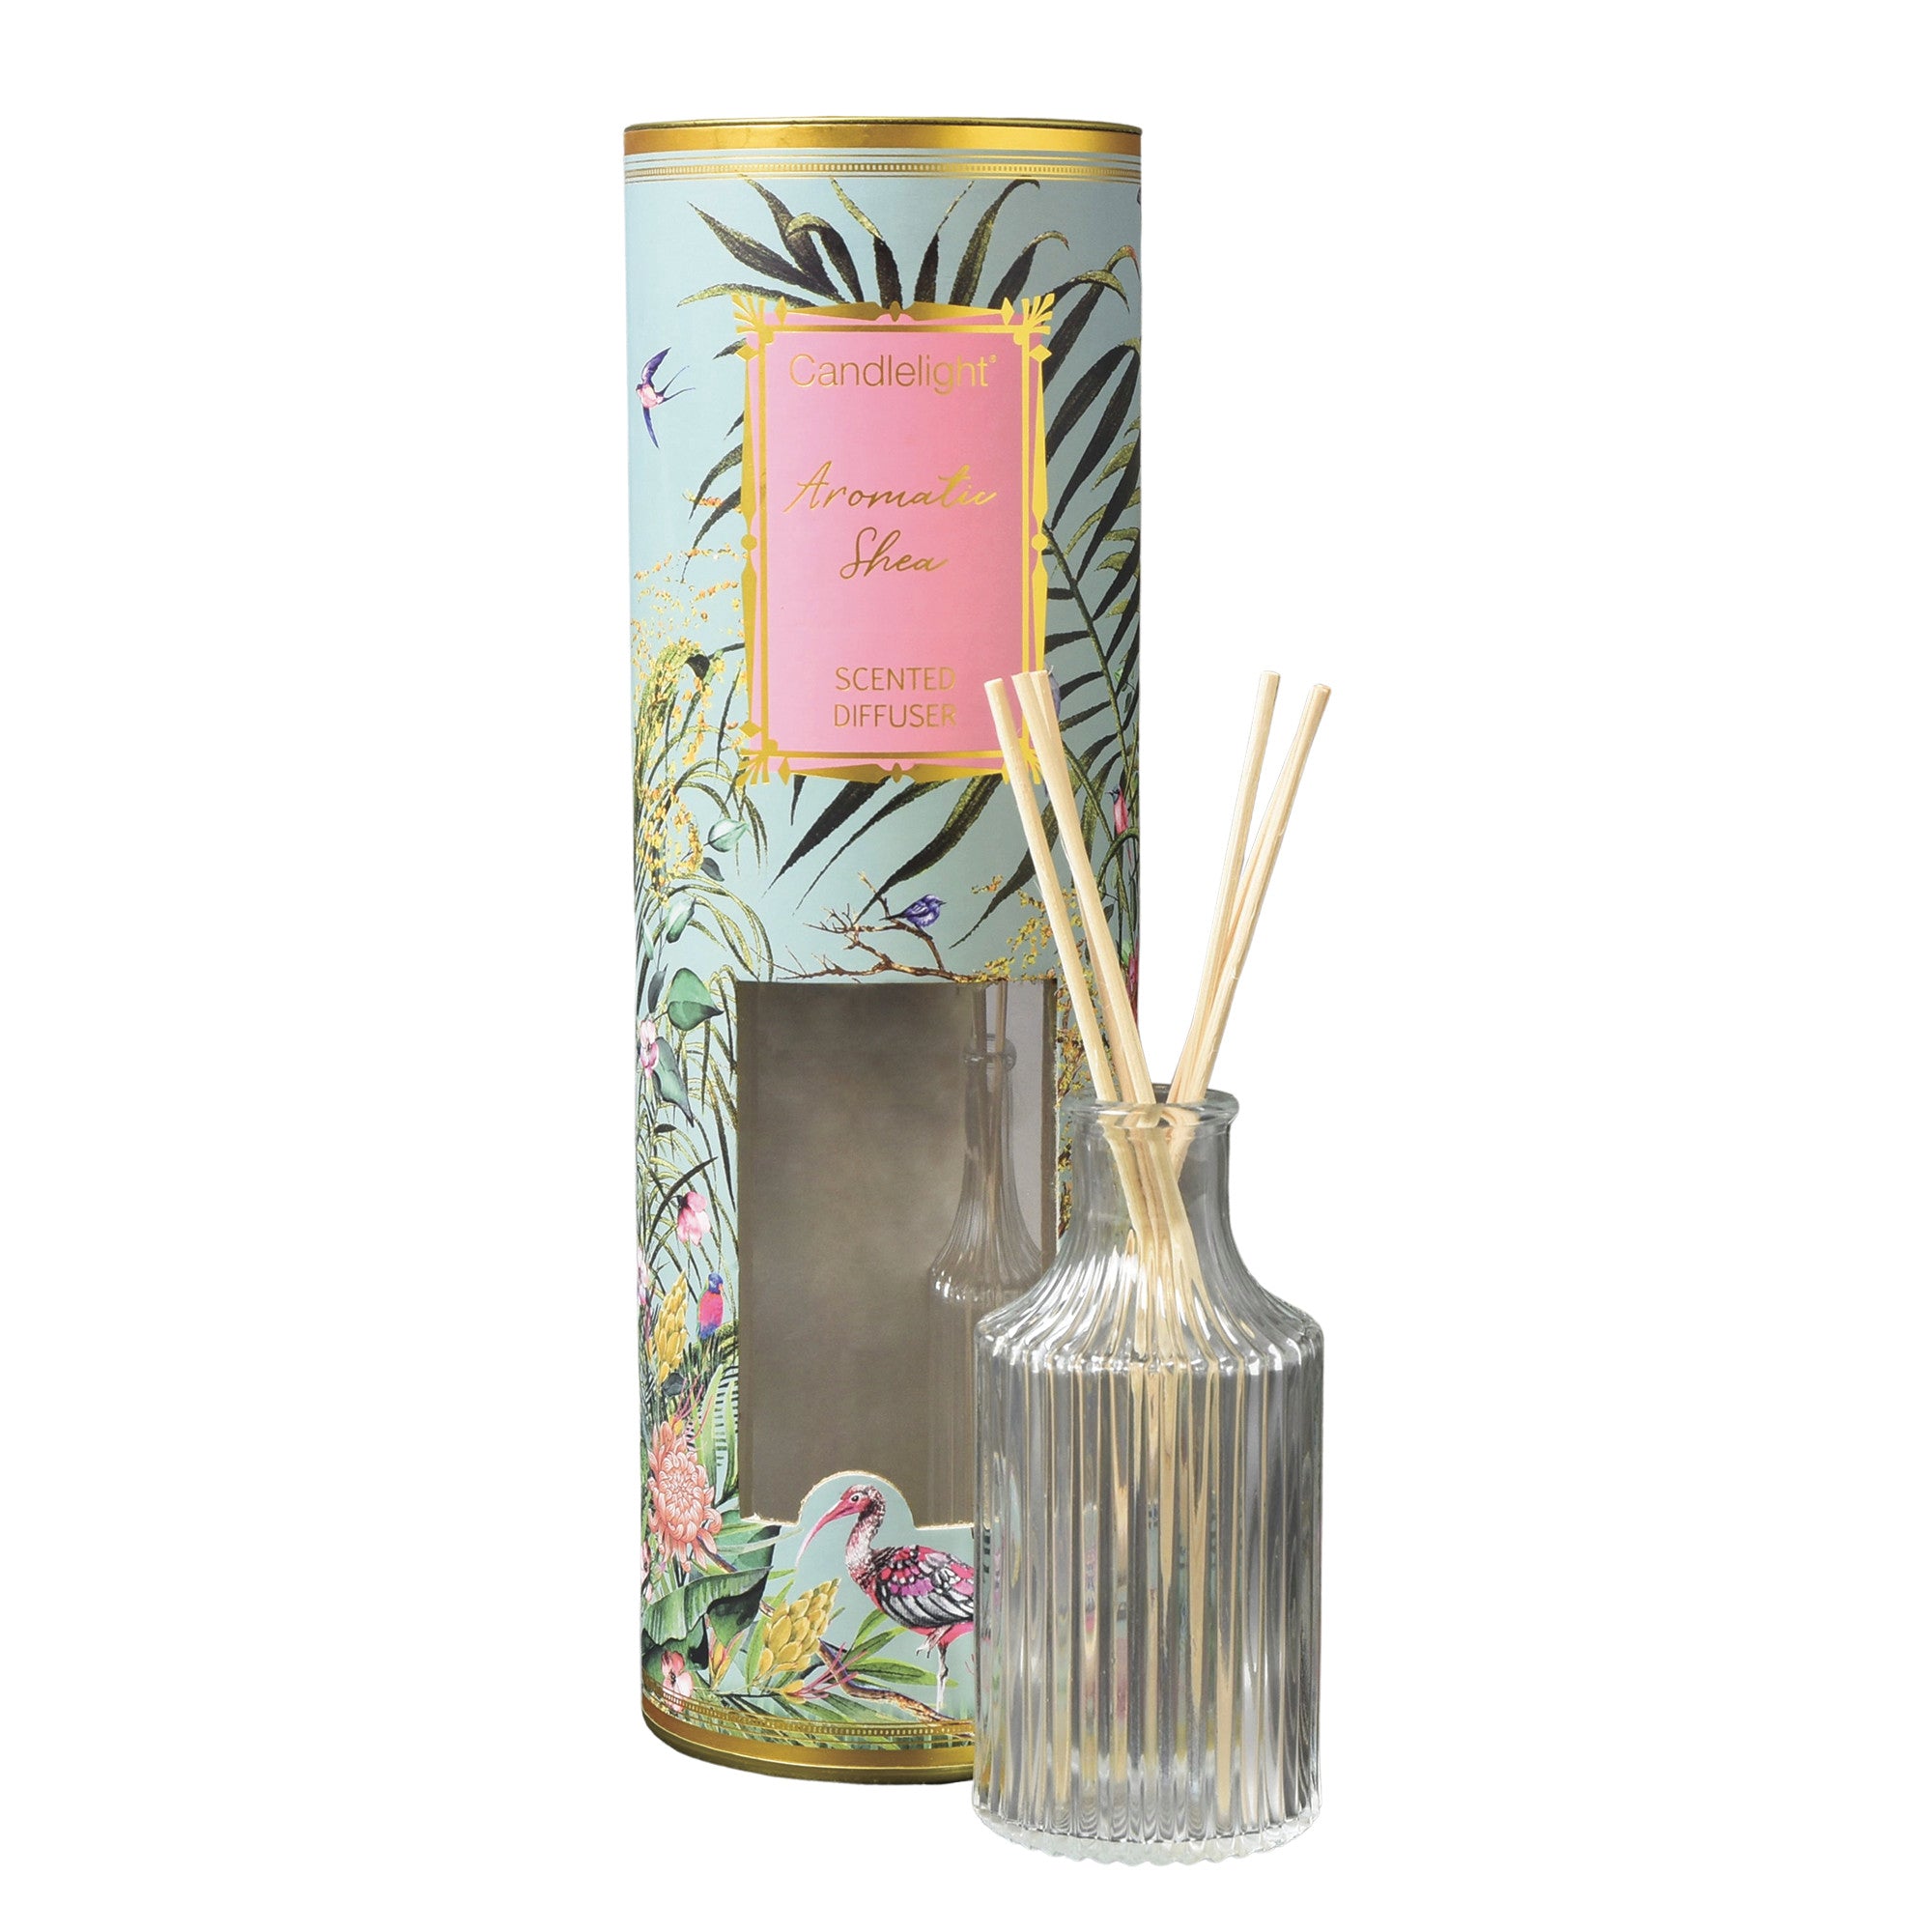 Aromatic Shea Scented Reed Diffuser